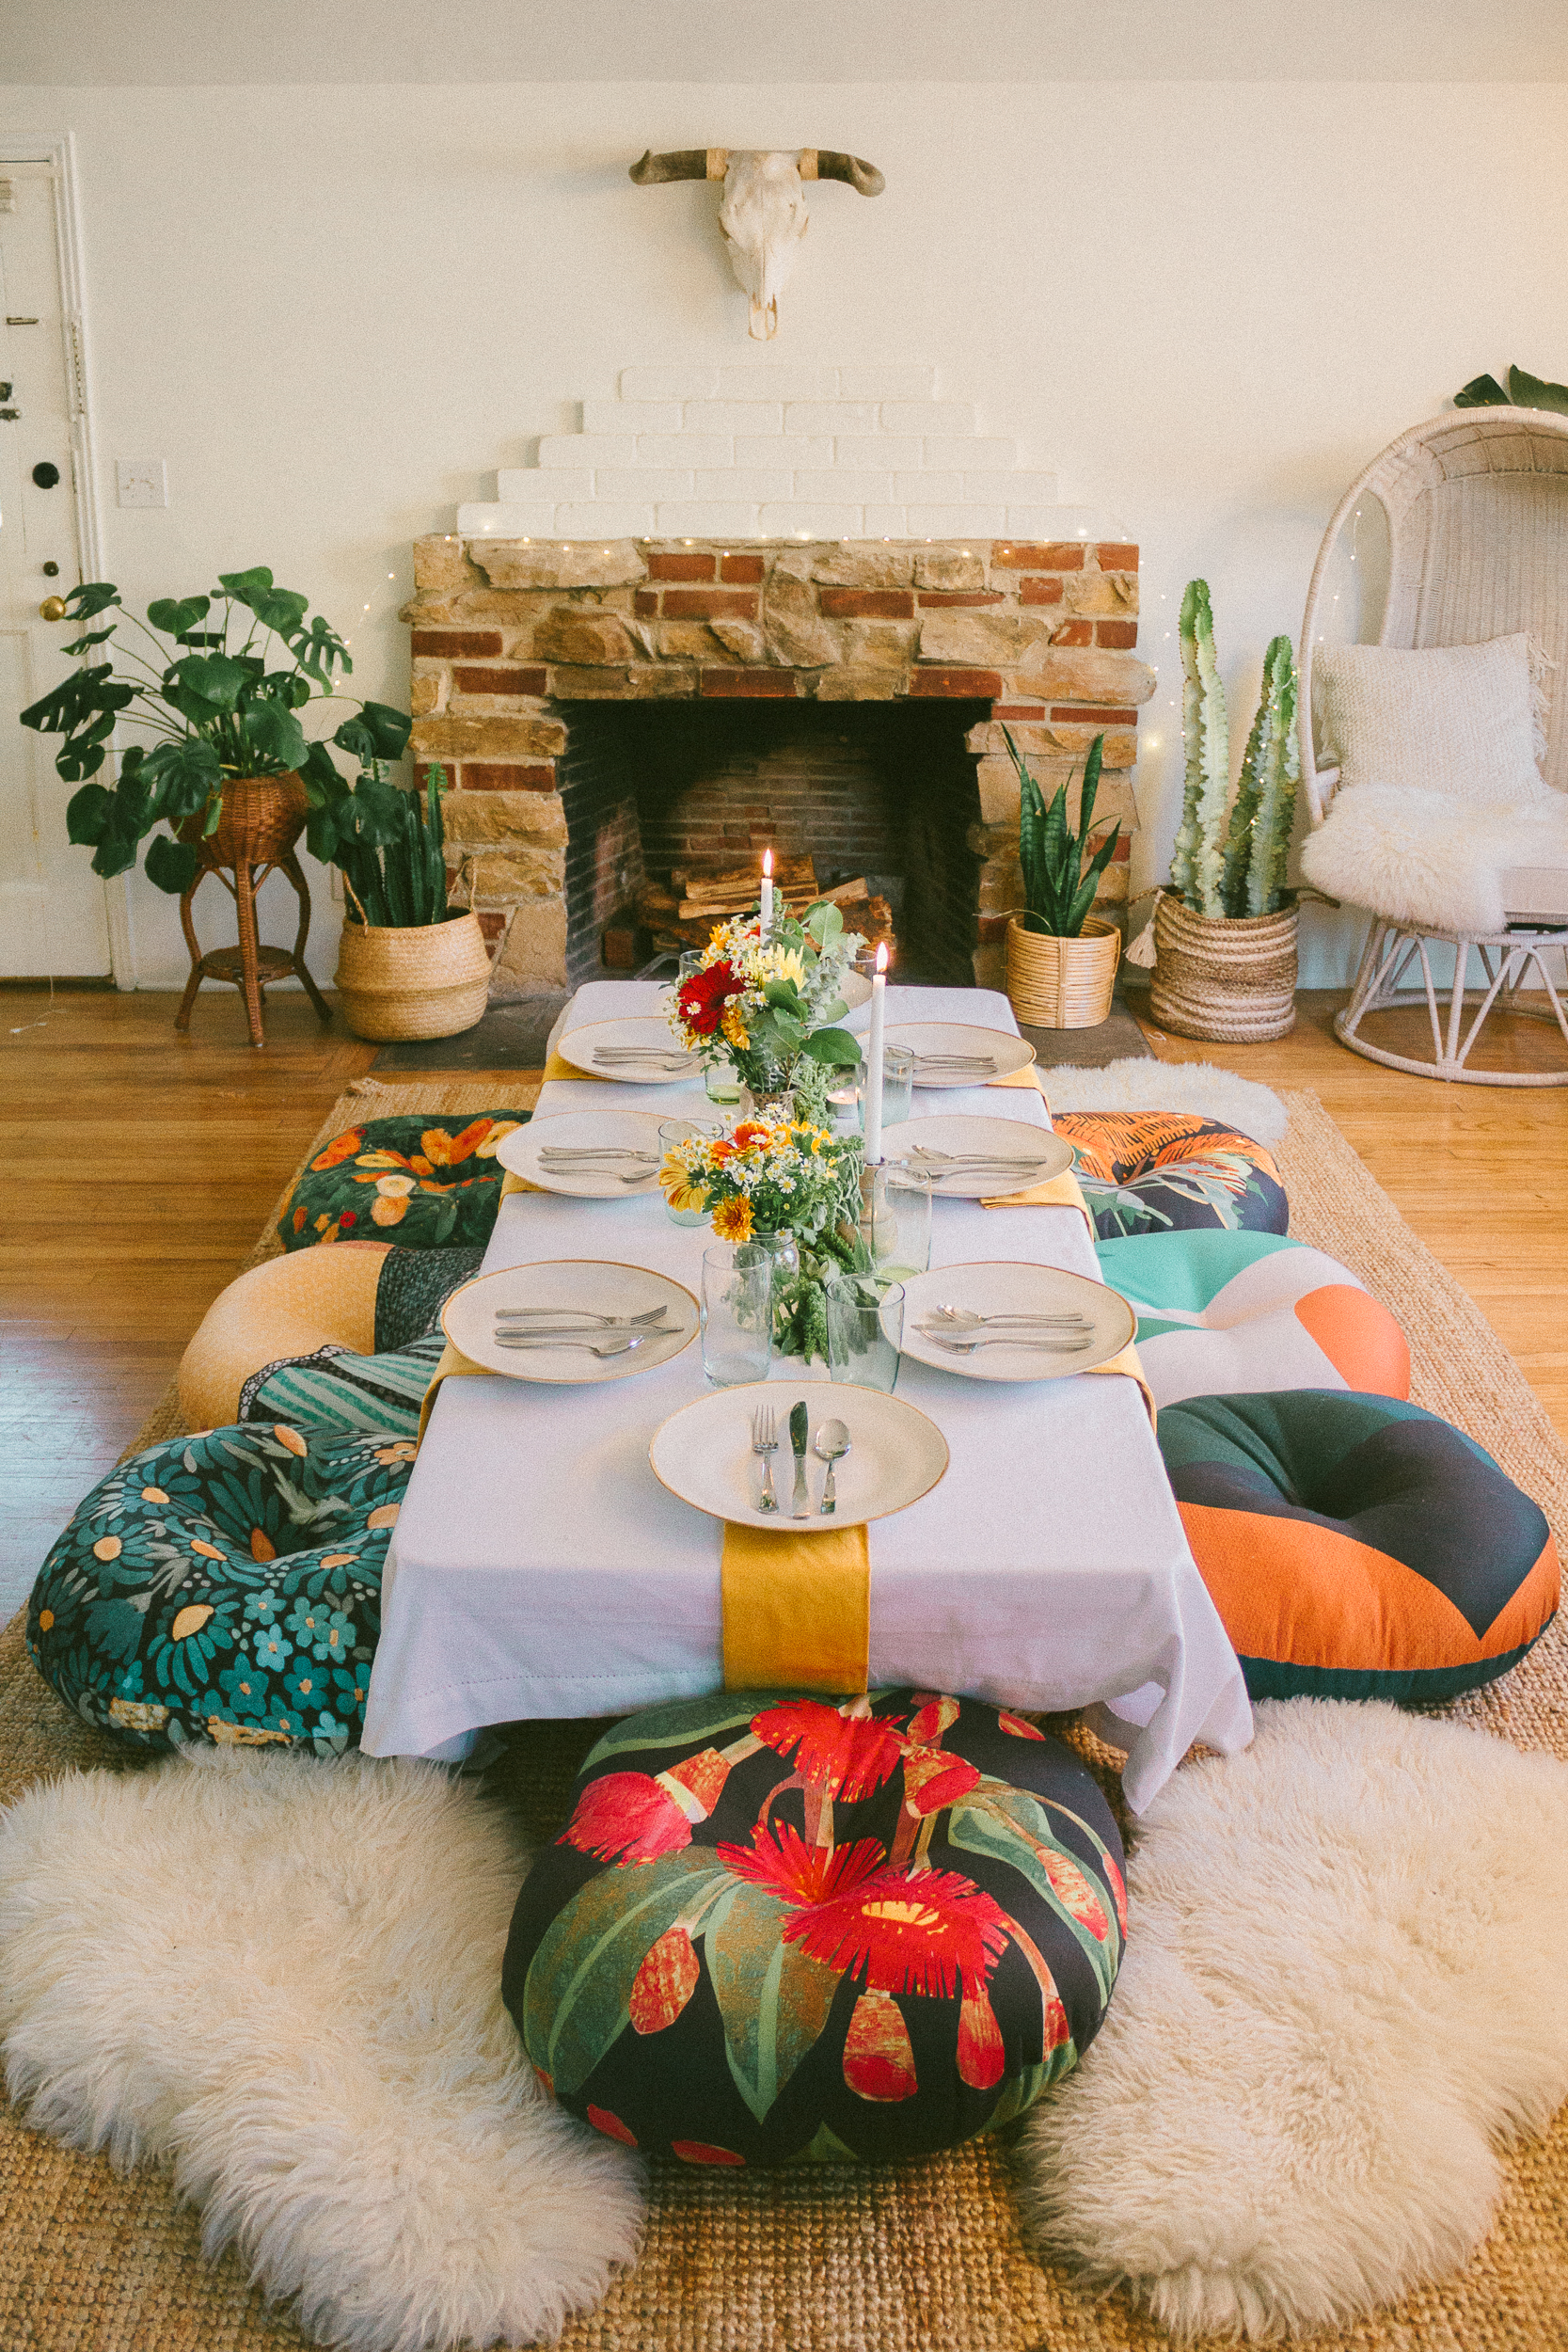 How To Host a Dinner Party in a Small Space